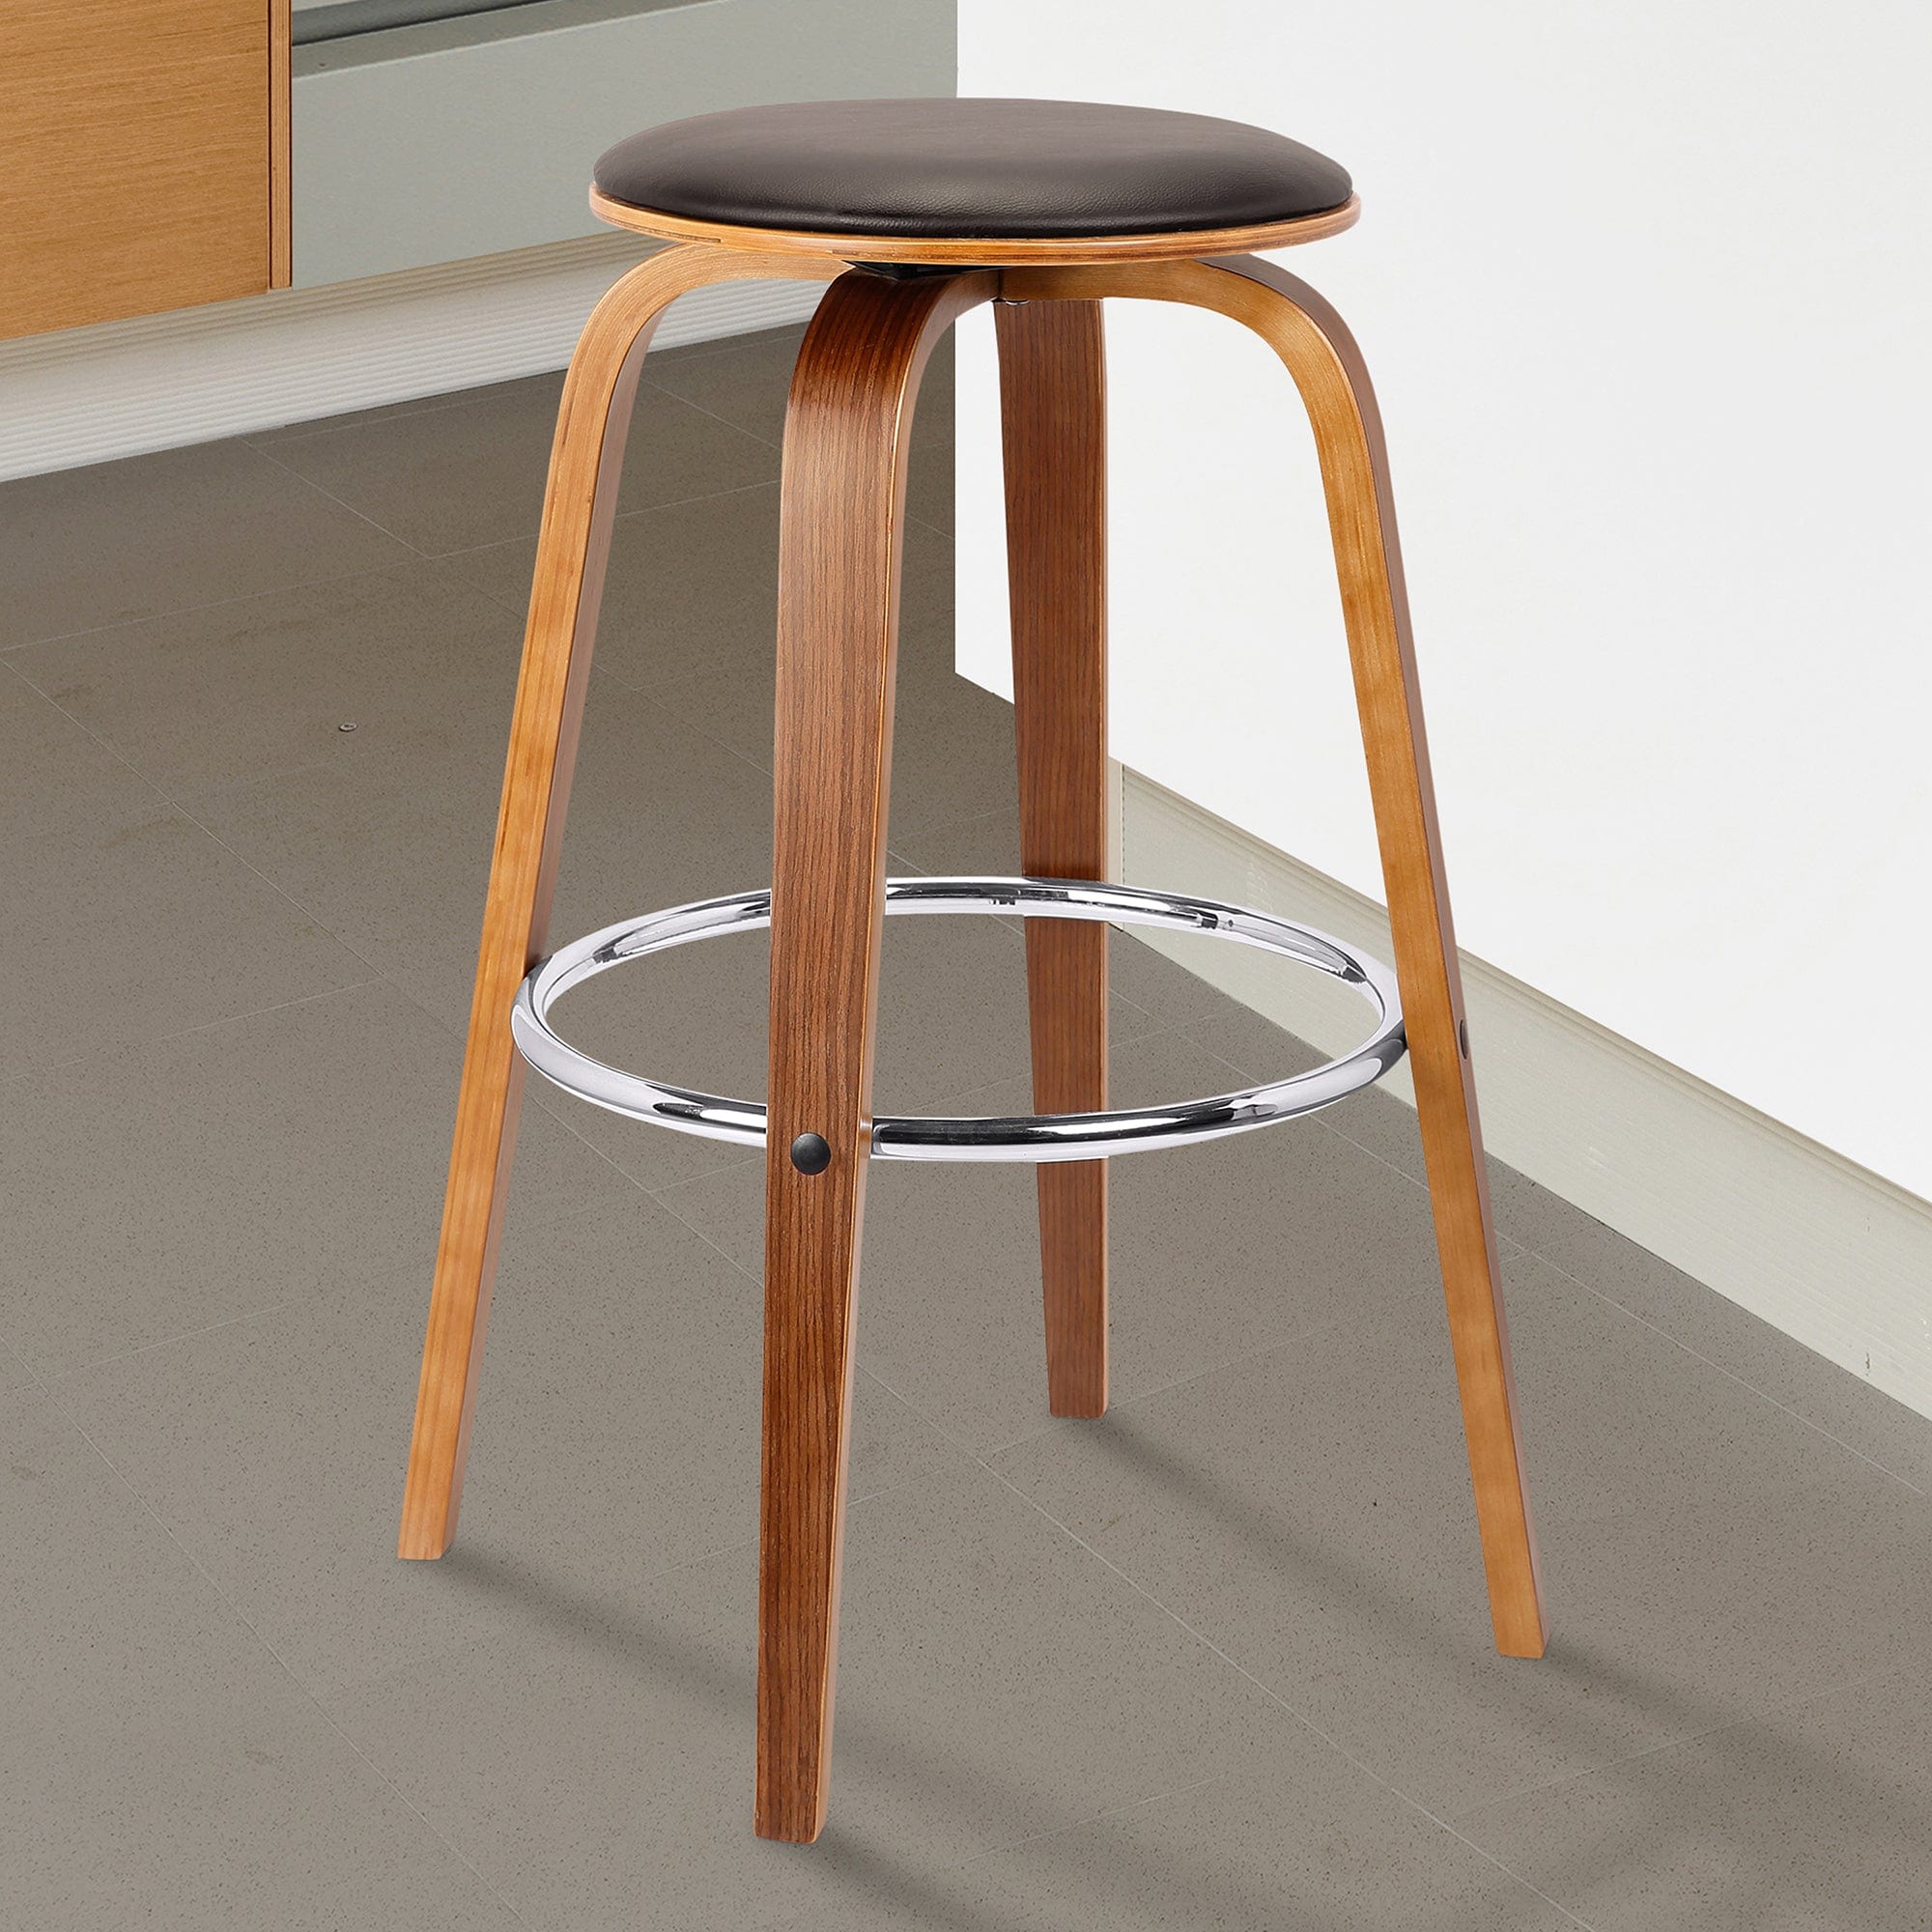 Armen Living Barstool Armen Living | Harbor 26" Counter Height Backless Swivel Brown Faux Leather and Walnut Wood Mid-Century Modern Bar Stool | LCHBBABRWA26